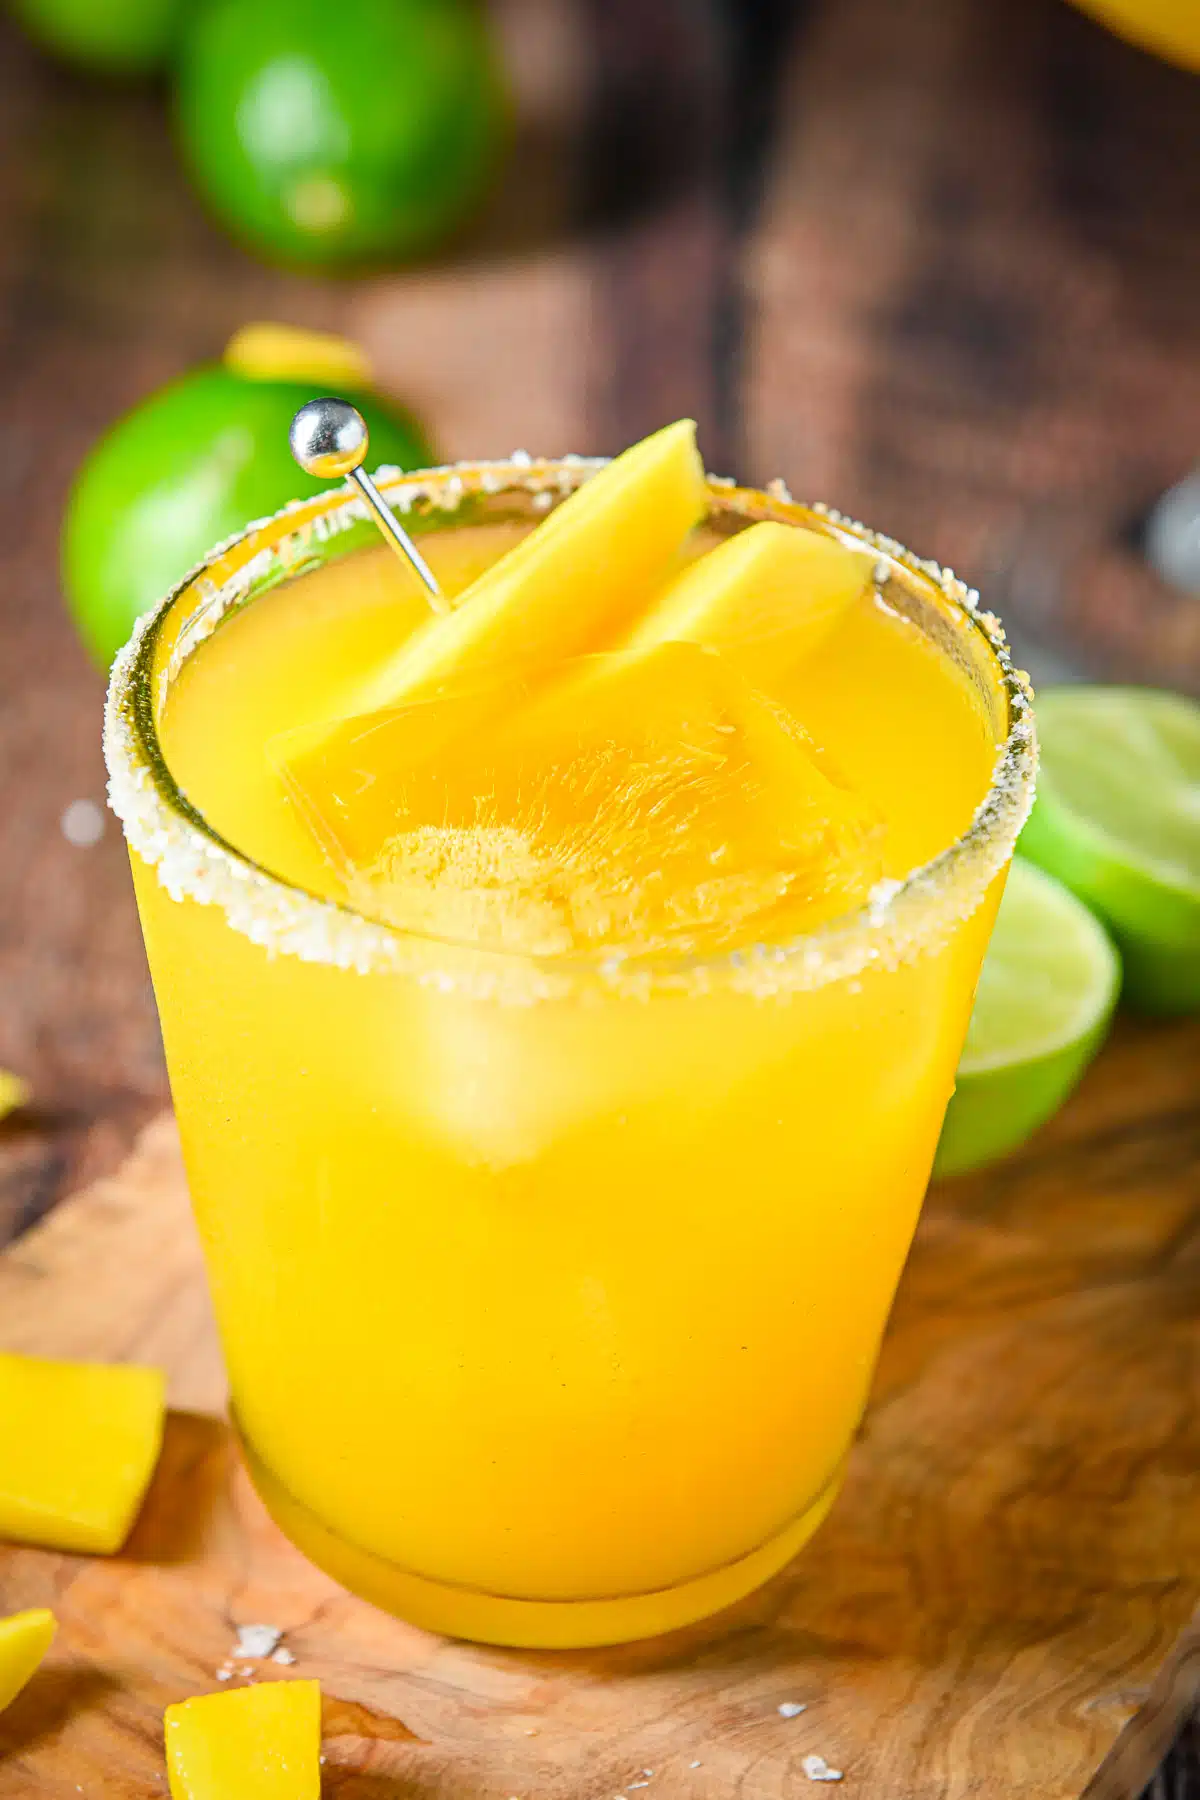 Close up of a margarita in a glass with mangos as garnish and limes on the table